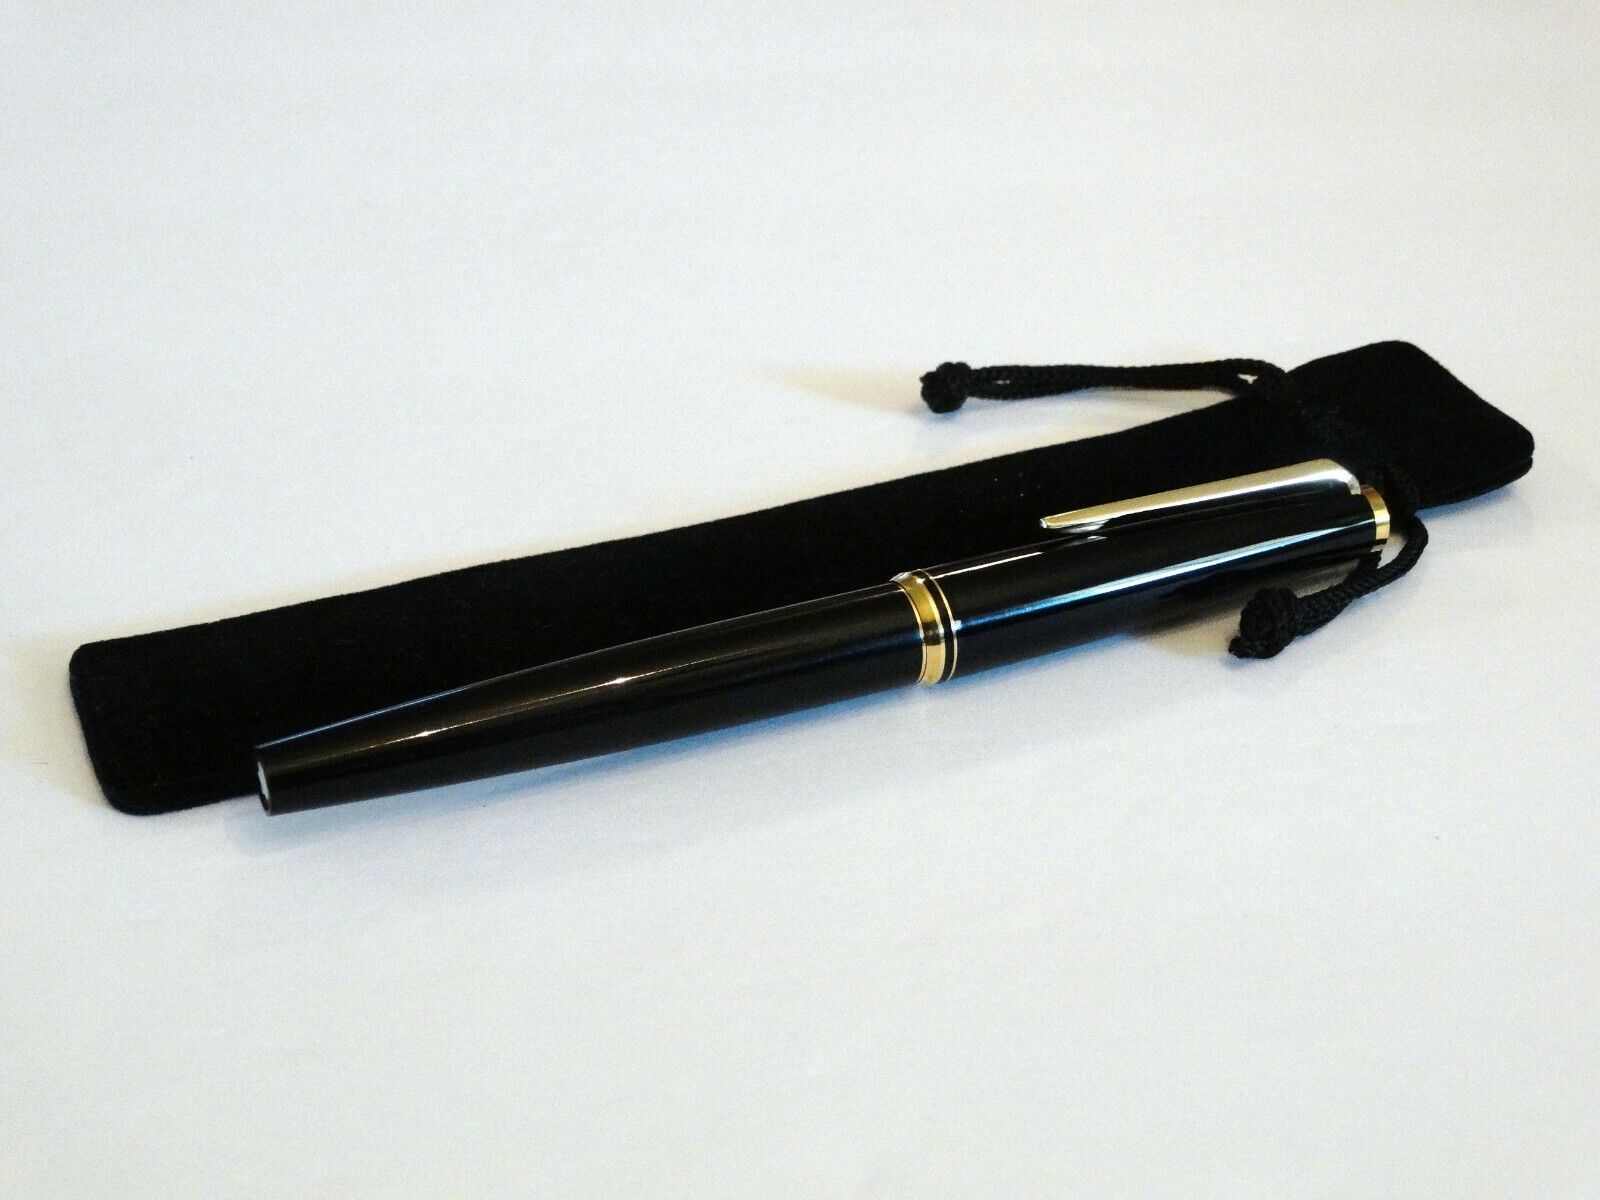 MONTBLANC 221P FOUNTAIN PEN IN BLACK & GOLD TRIM WITH 14K GOLD EF SIZE NIB -MINT